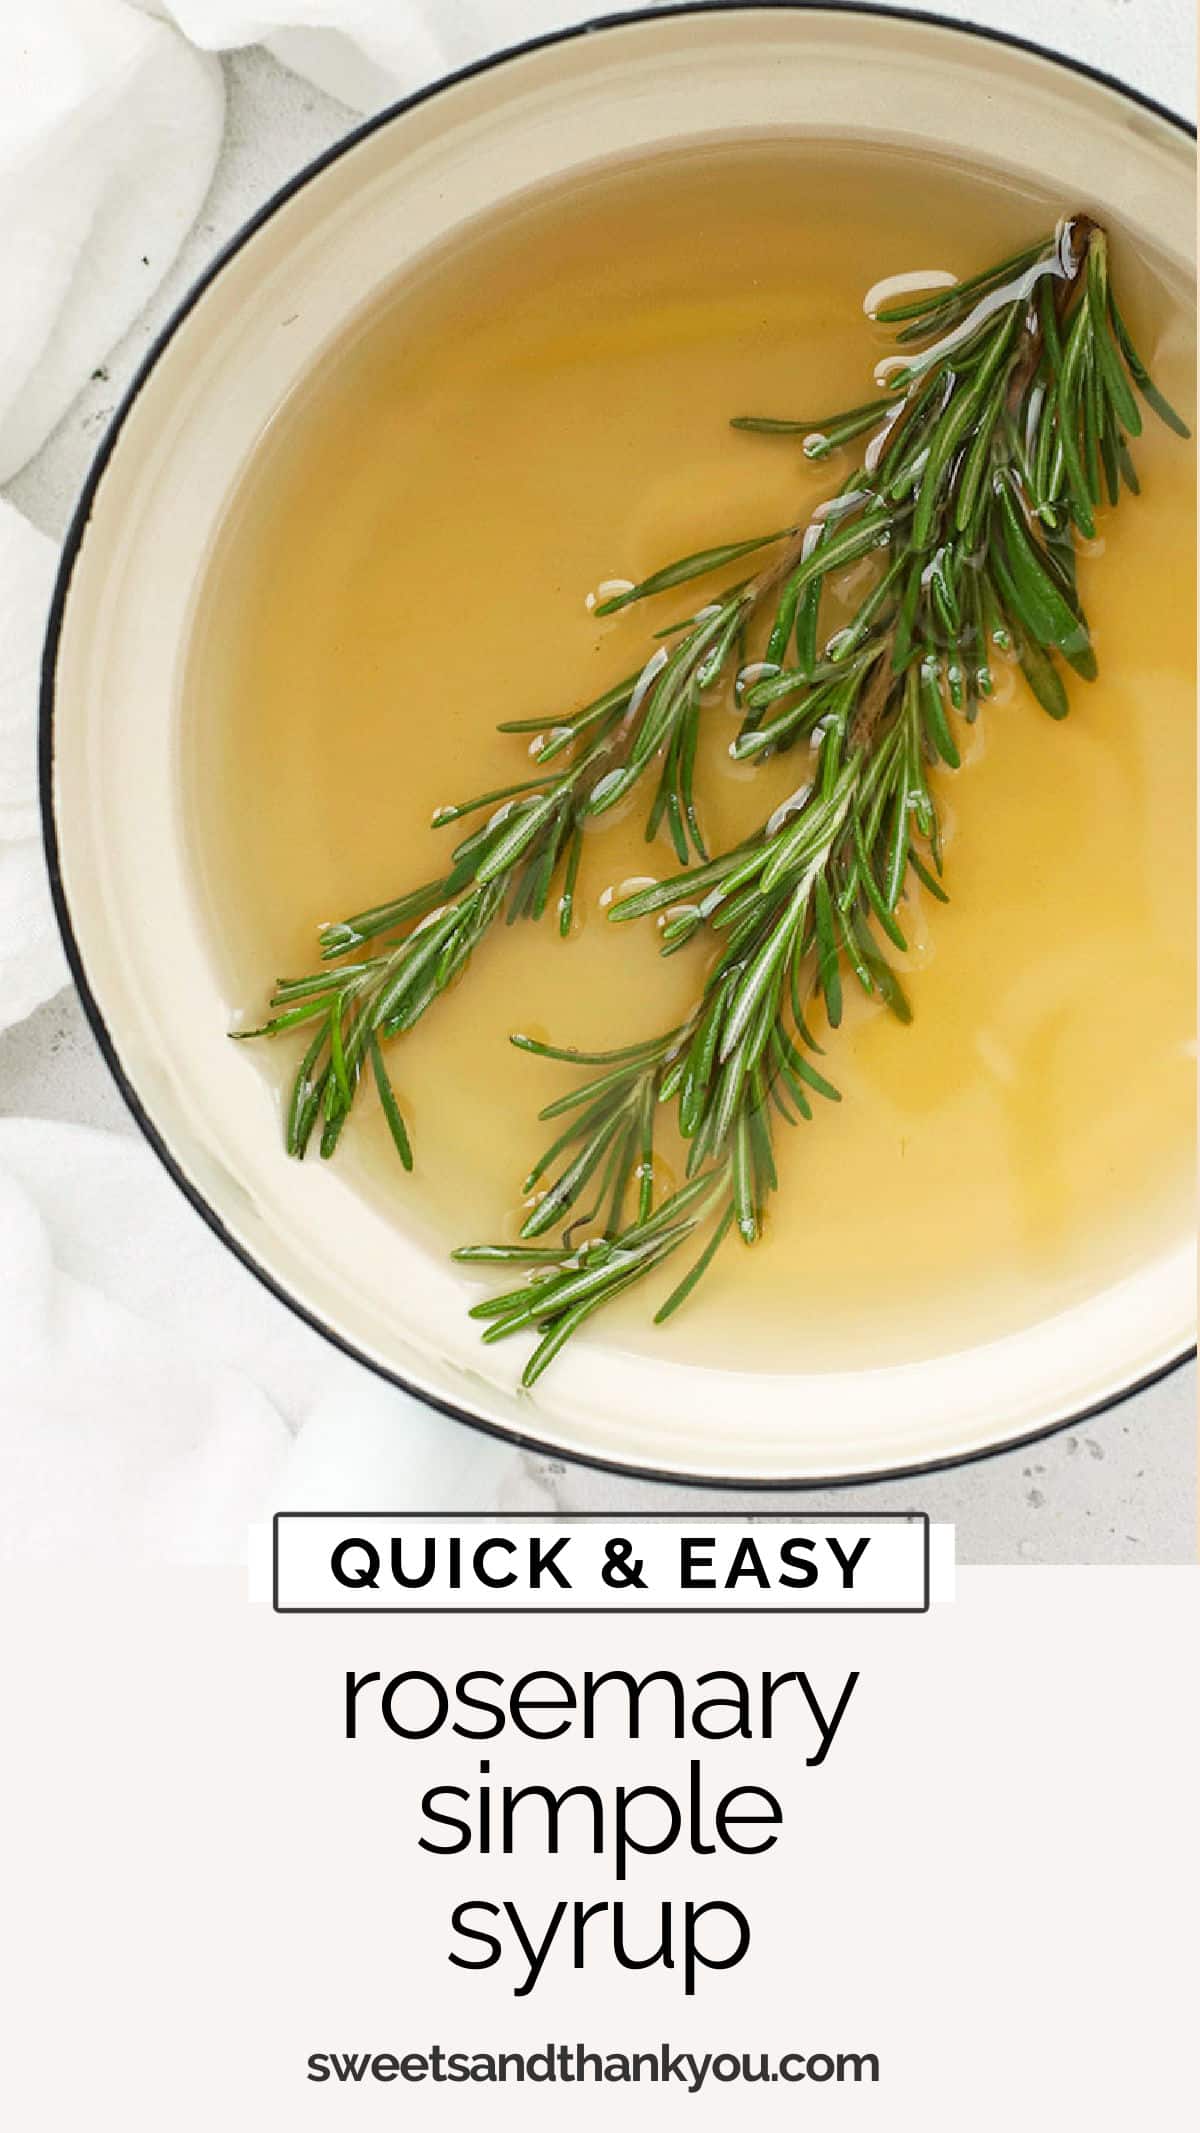 How To Make Rosemary Simple Syrup - This homemade rosemary syrup recipe adds gorgeous flavor to mocktails and cocktails of all kinds. (Don't miss all the yummy ways to use it!) // rosemary cocktail syrup recipe / rosemary mocktail syrup recipe / simple syrup recipes / rosemary infused simple syrup, infused simple syrup recipe / rosemary mocktails / rosemary cocktails / rosemary mocktail mixer / rosemary cocktail mixer 